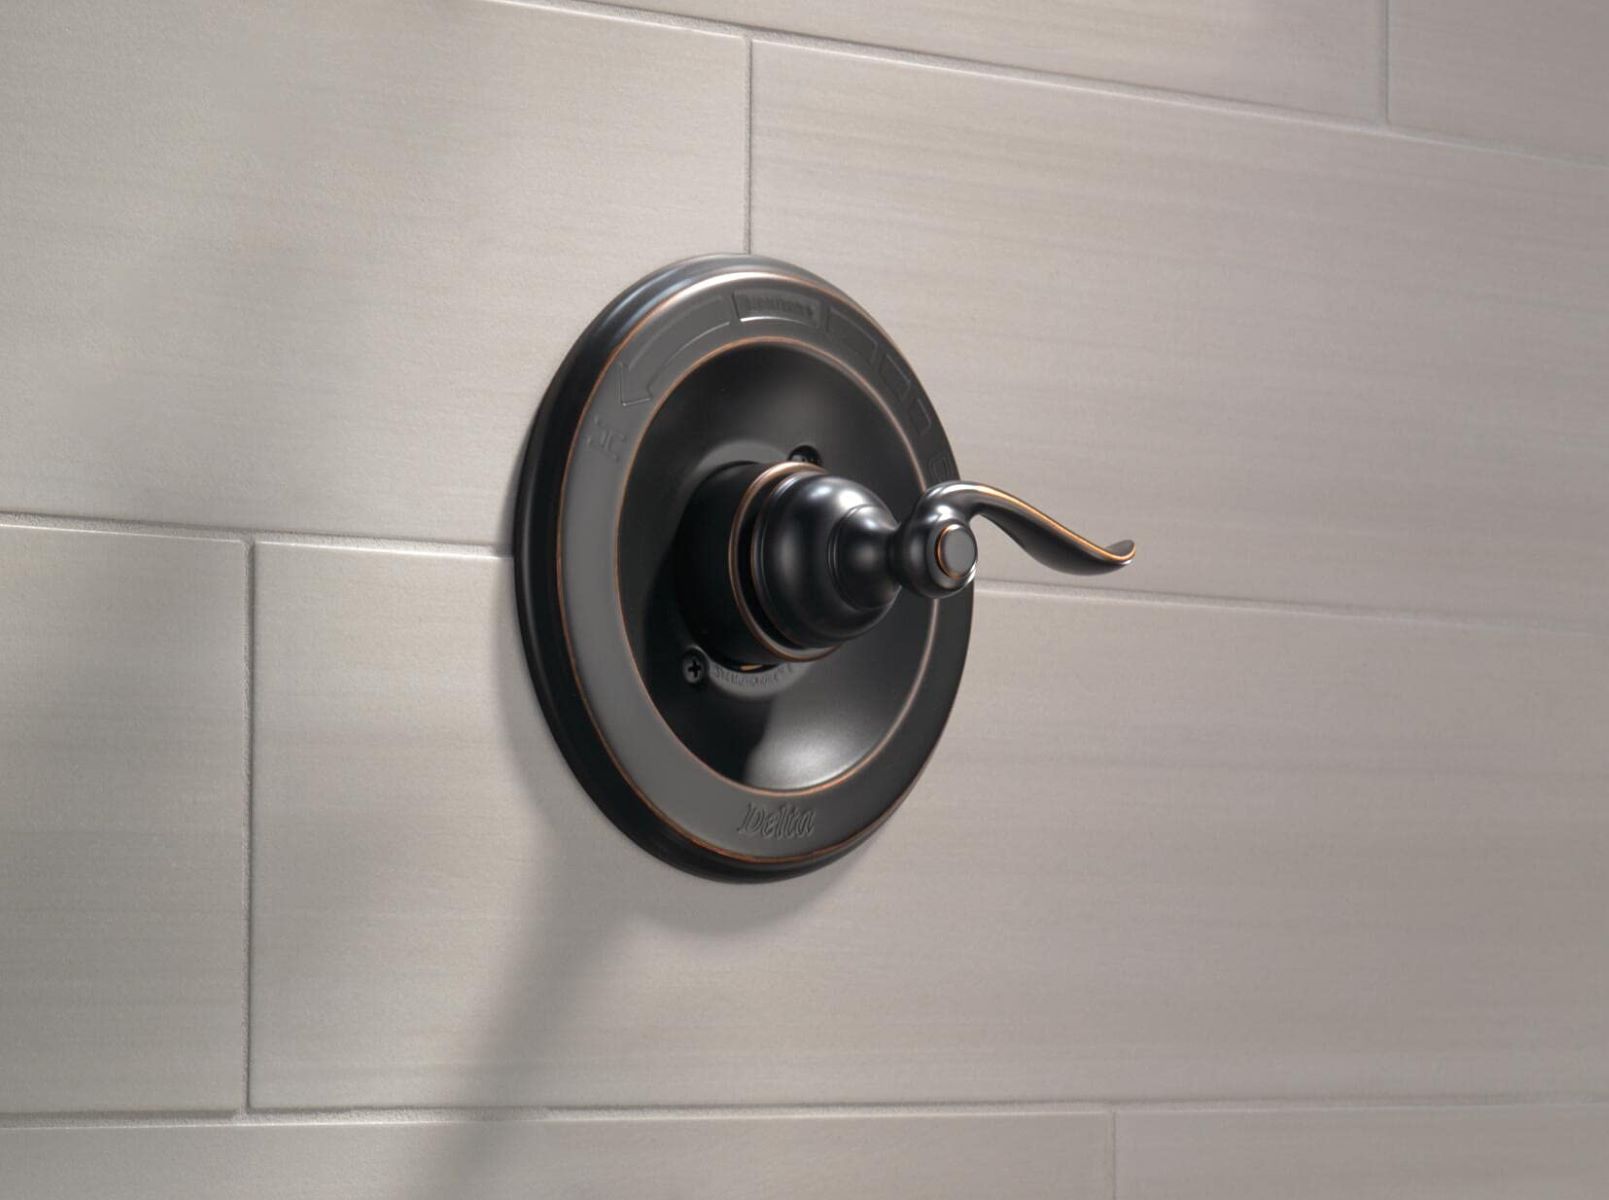 Easy Steps To Remove A Delta Shower Handle - Say Goodbye To Plumbing Hassles!